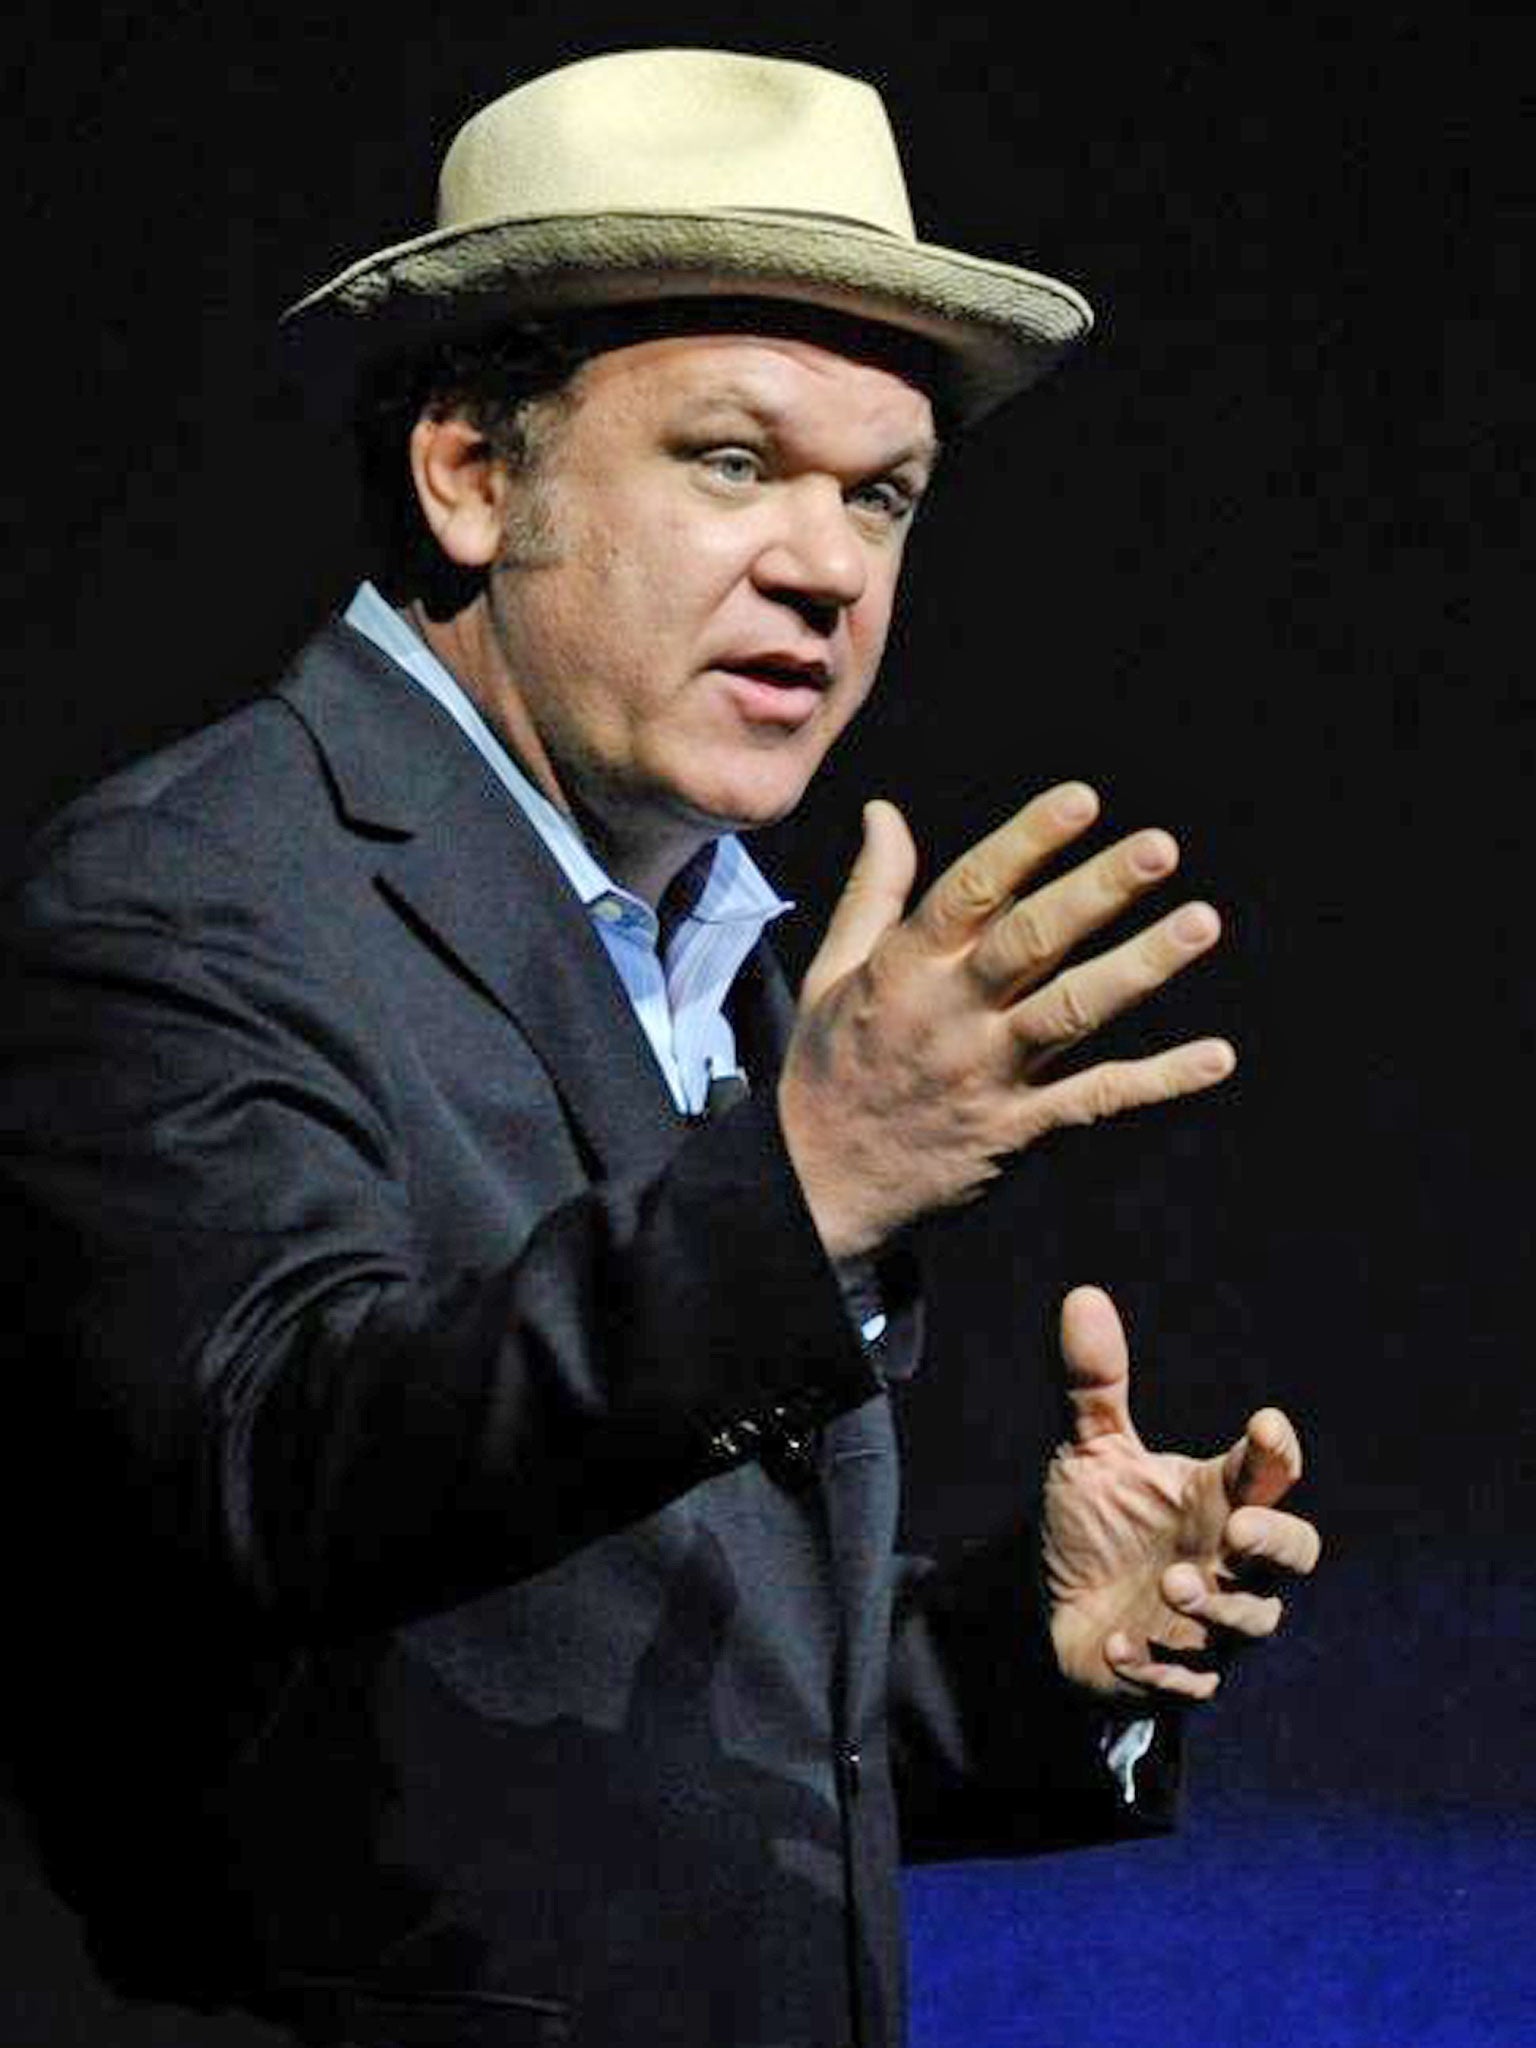 John C Reilly has been building a musical career on the side of acting